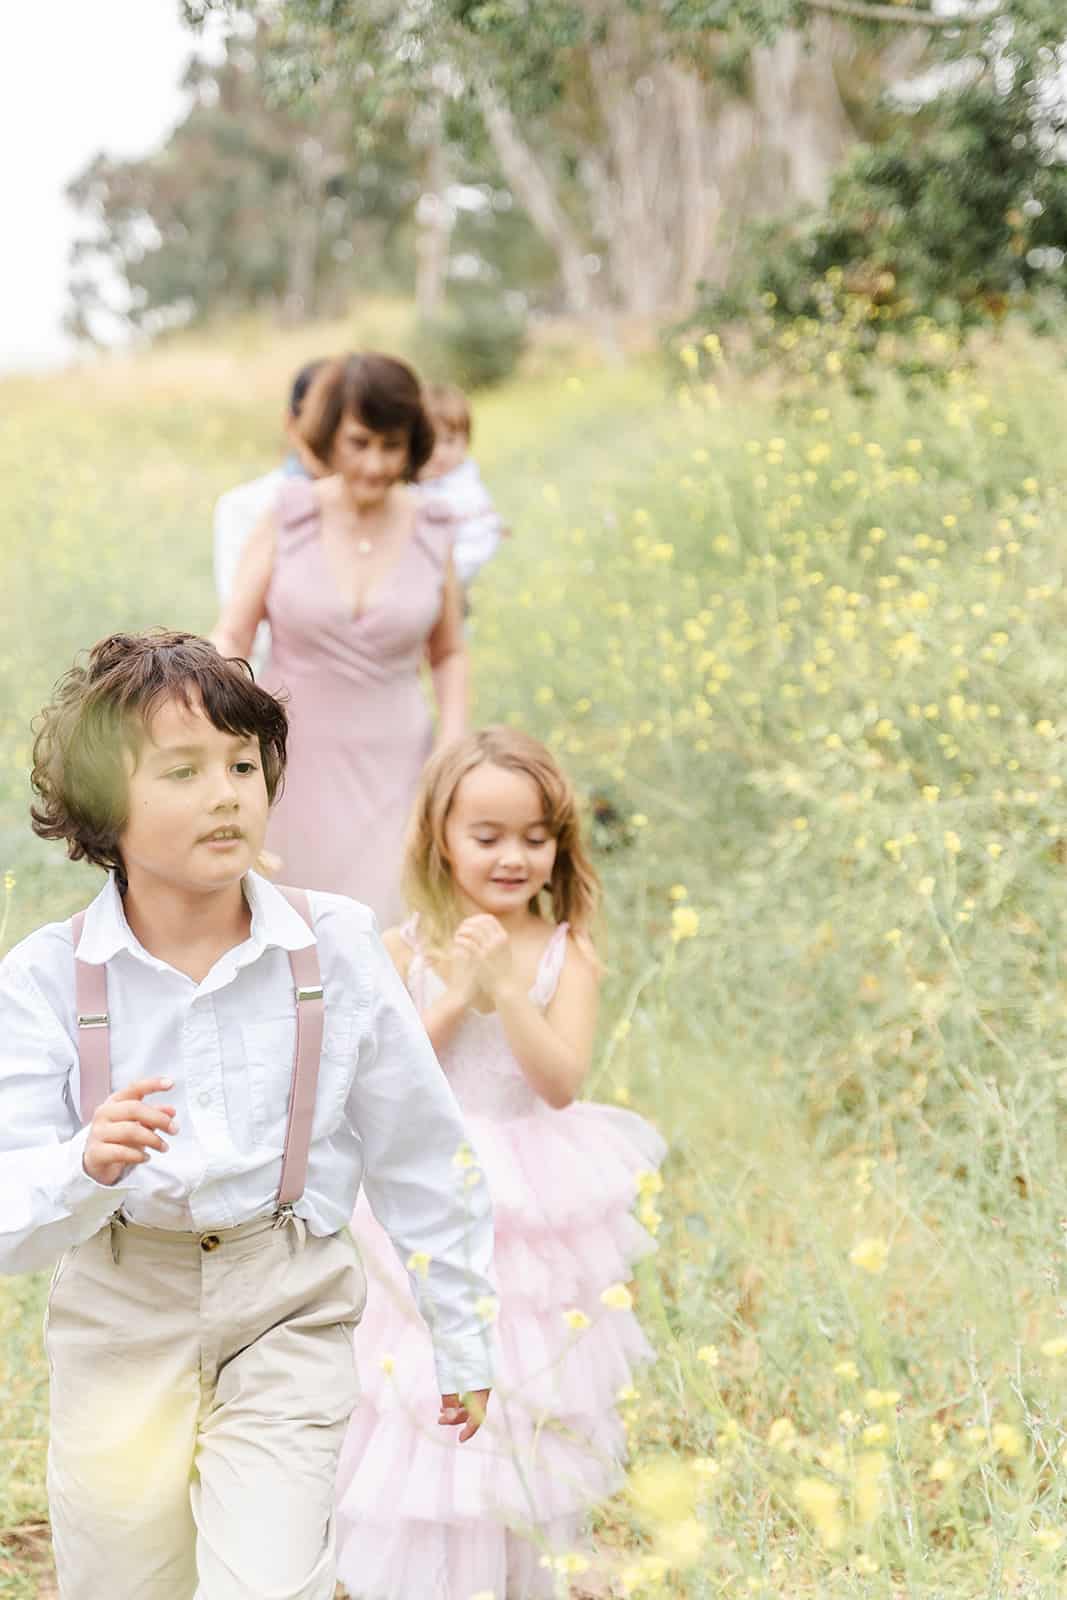 LePort Montessori Irvine students walk through a field of wildflowers with mom and dad behind them